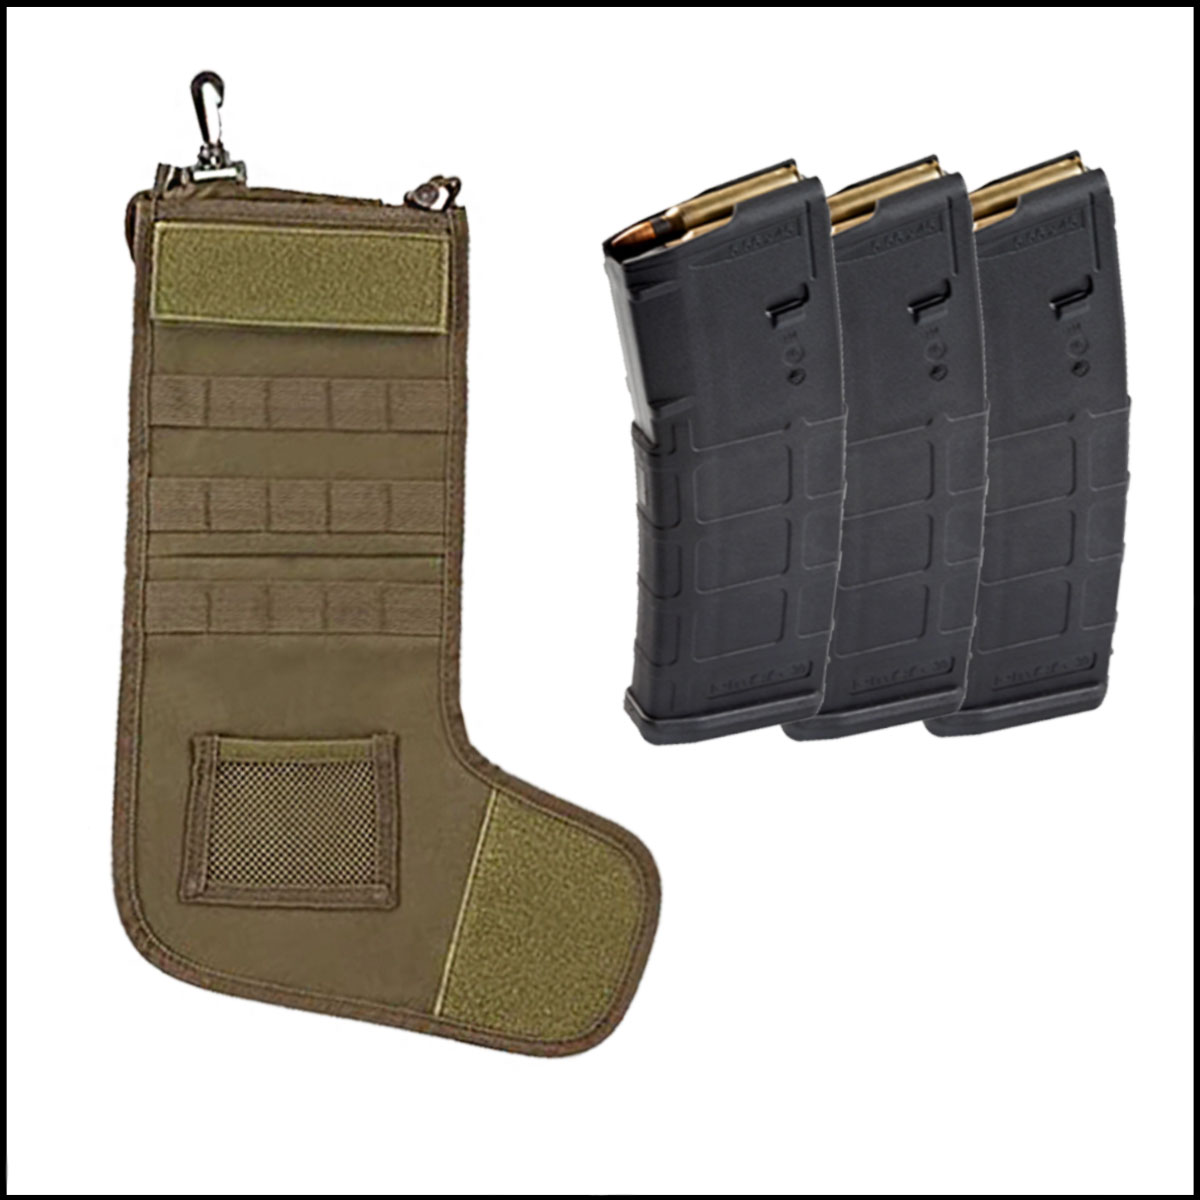 Tactical Gift Stocking: Tactical Stocking with handle - Tan + Magpul PMAG 30 AR/M4 Gen M2 MOE 5.56x45mm NATO (No Window) (3 - Pack)